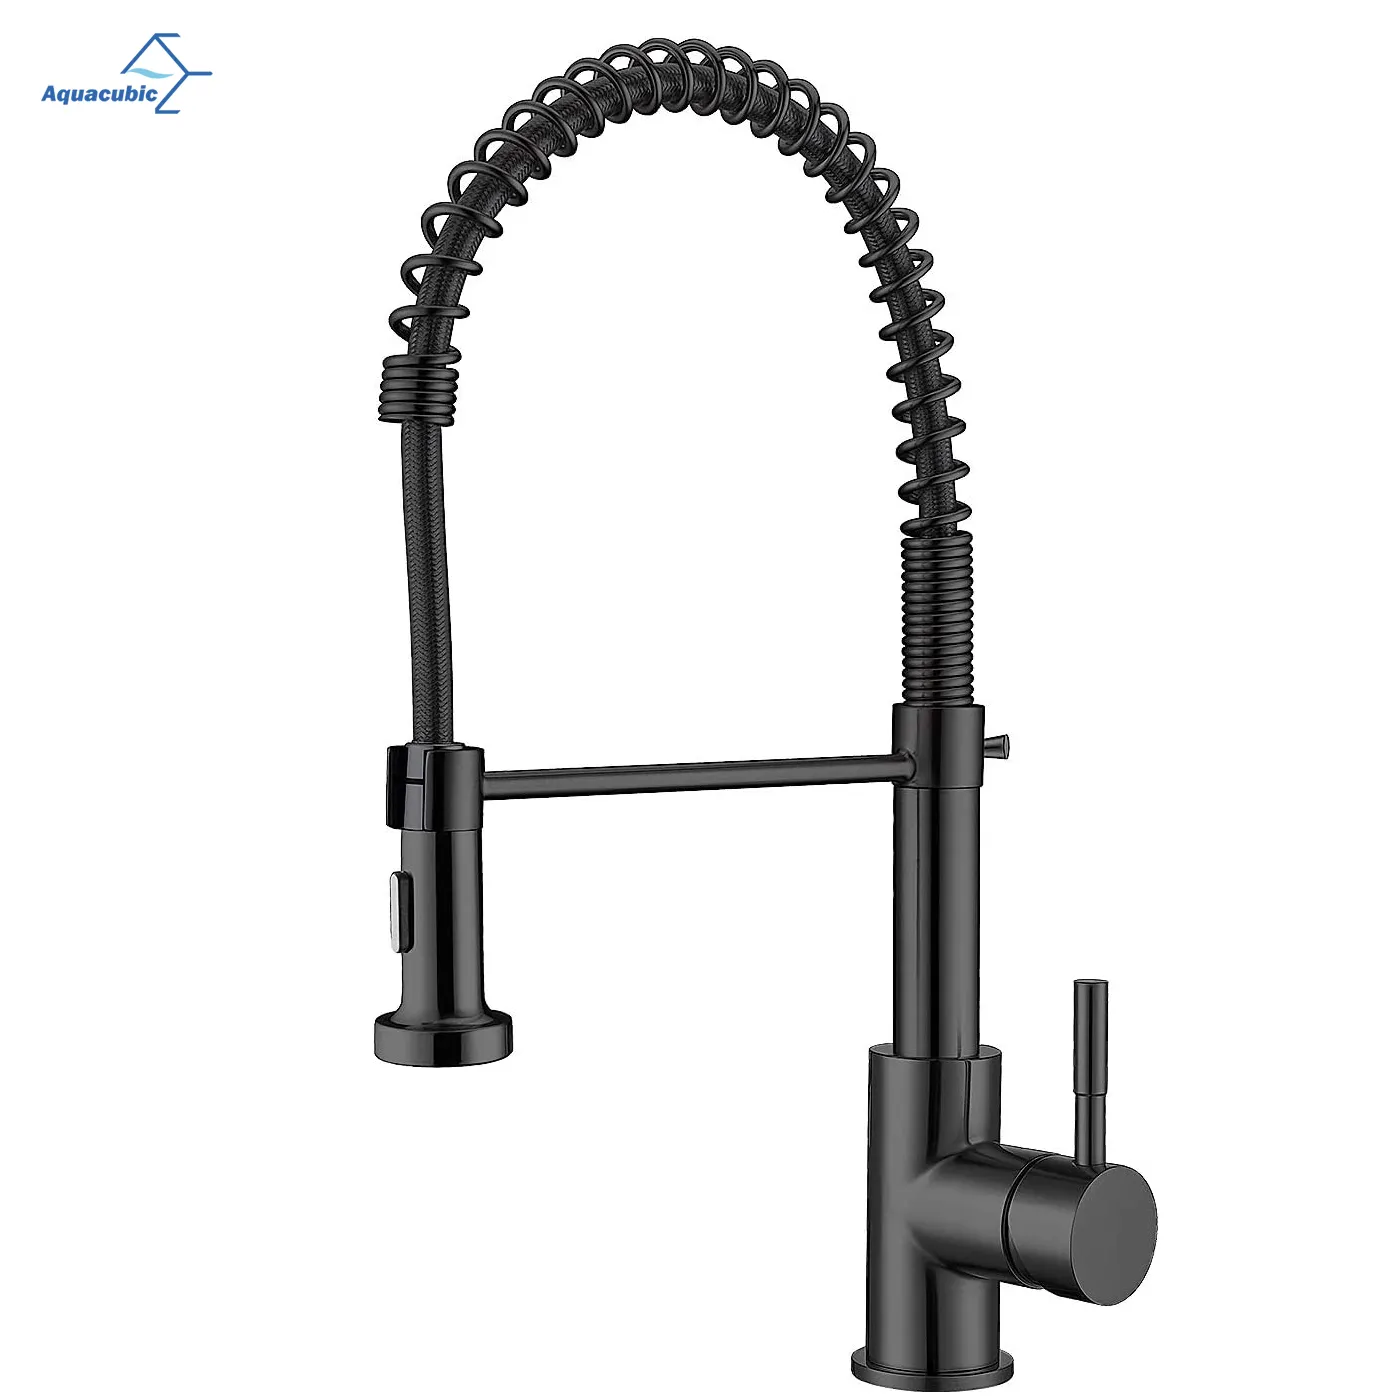 China Factory Aquacubic CUPC Certified Solid Brass Matte Black Pull Down Spring Kitchen Faucet